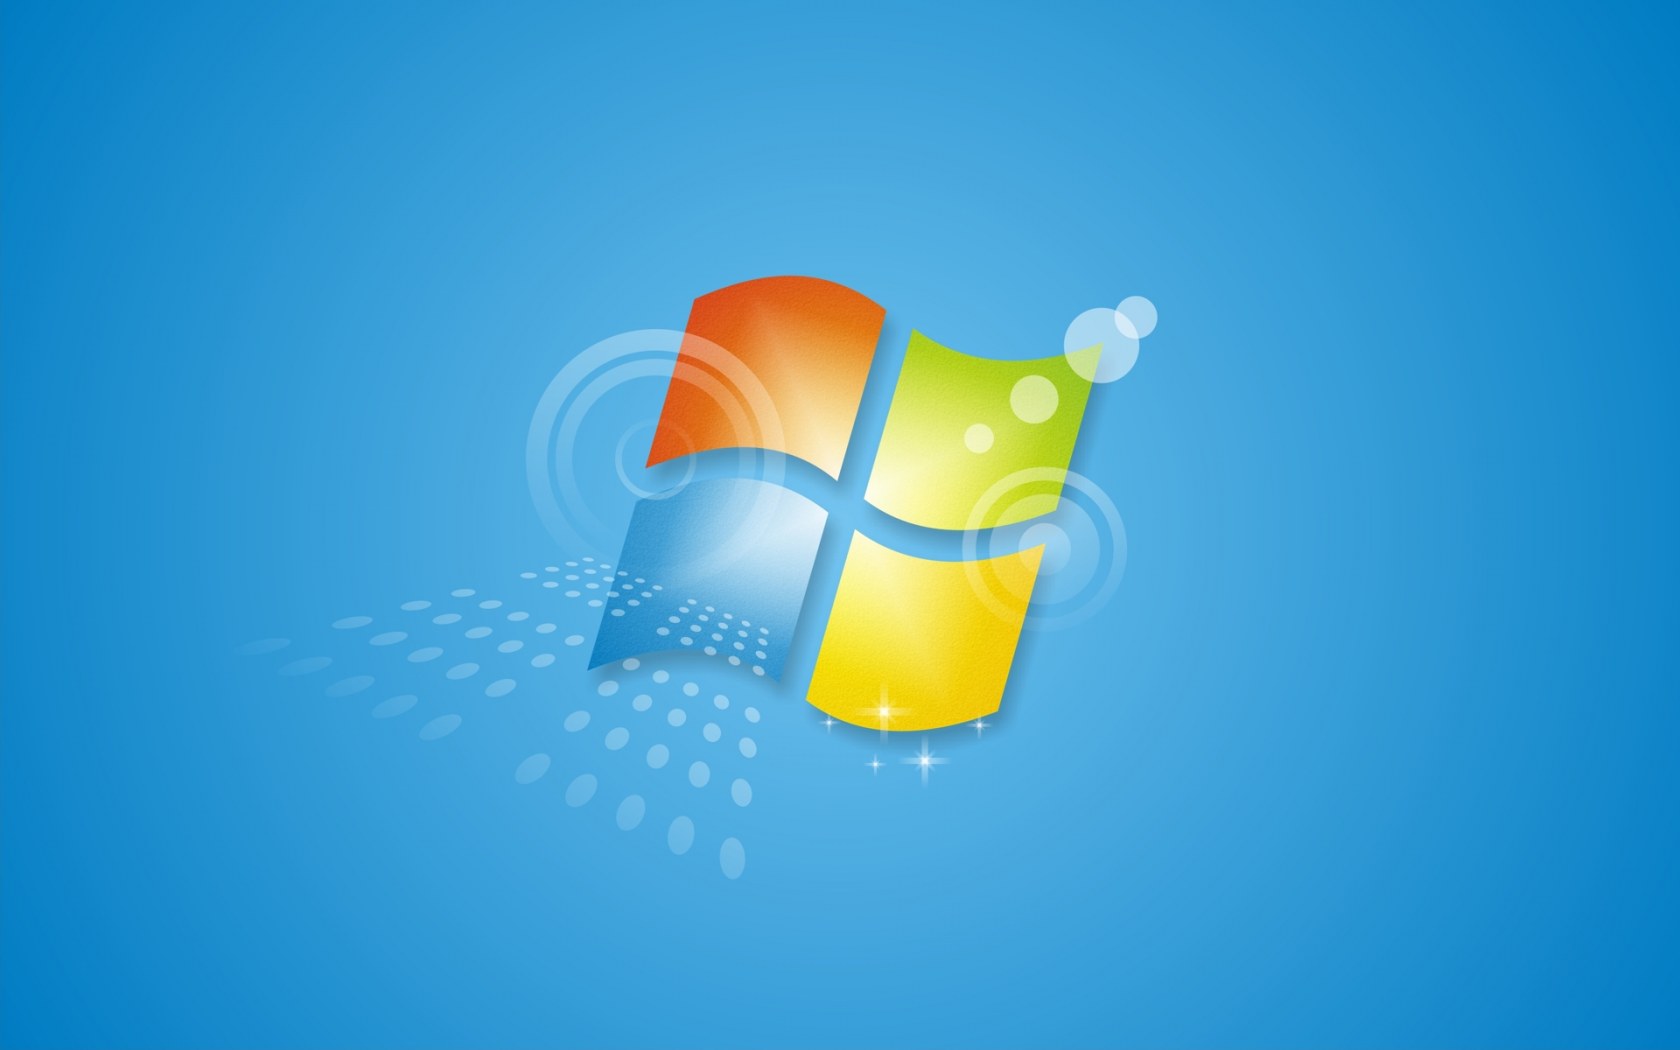 Windows 7 users can download and restore